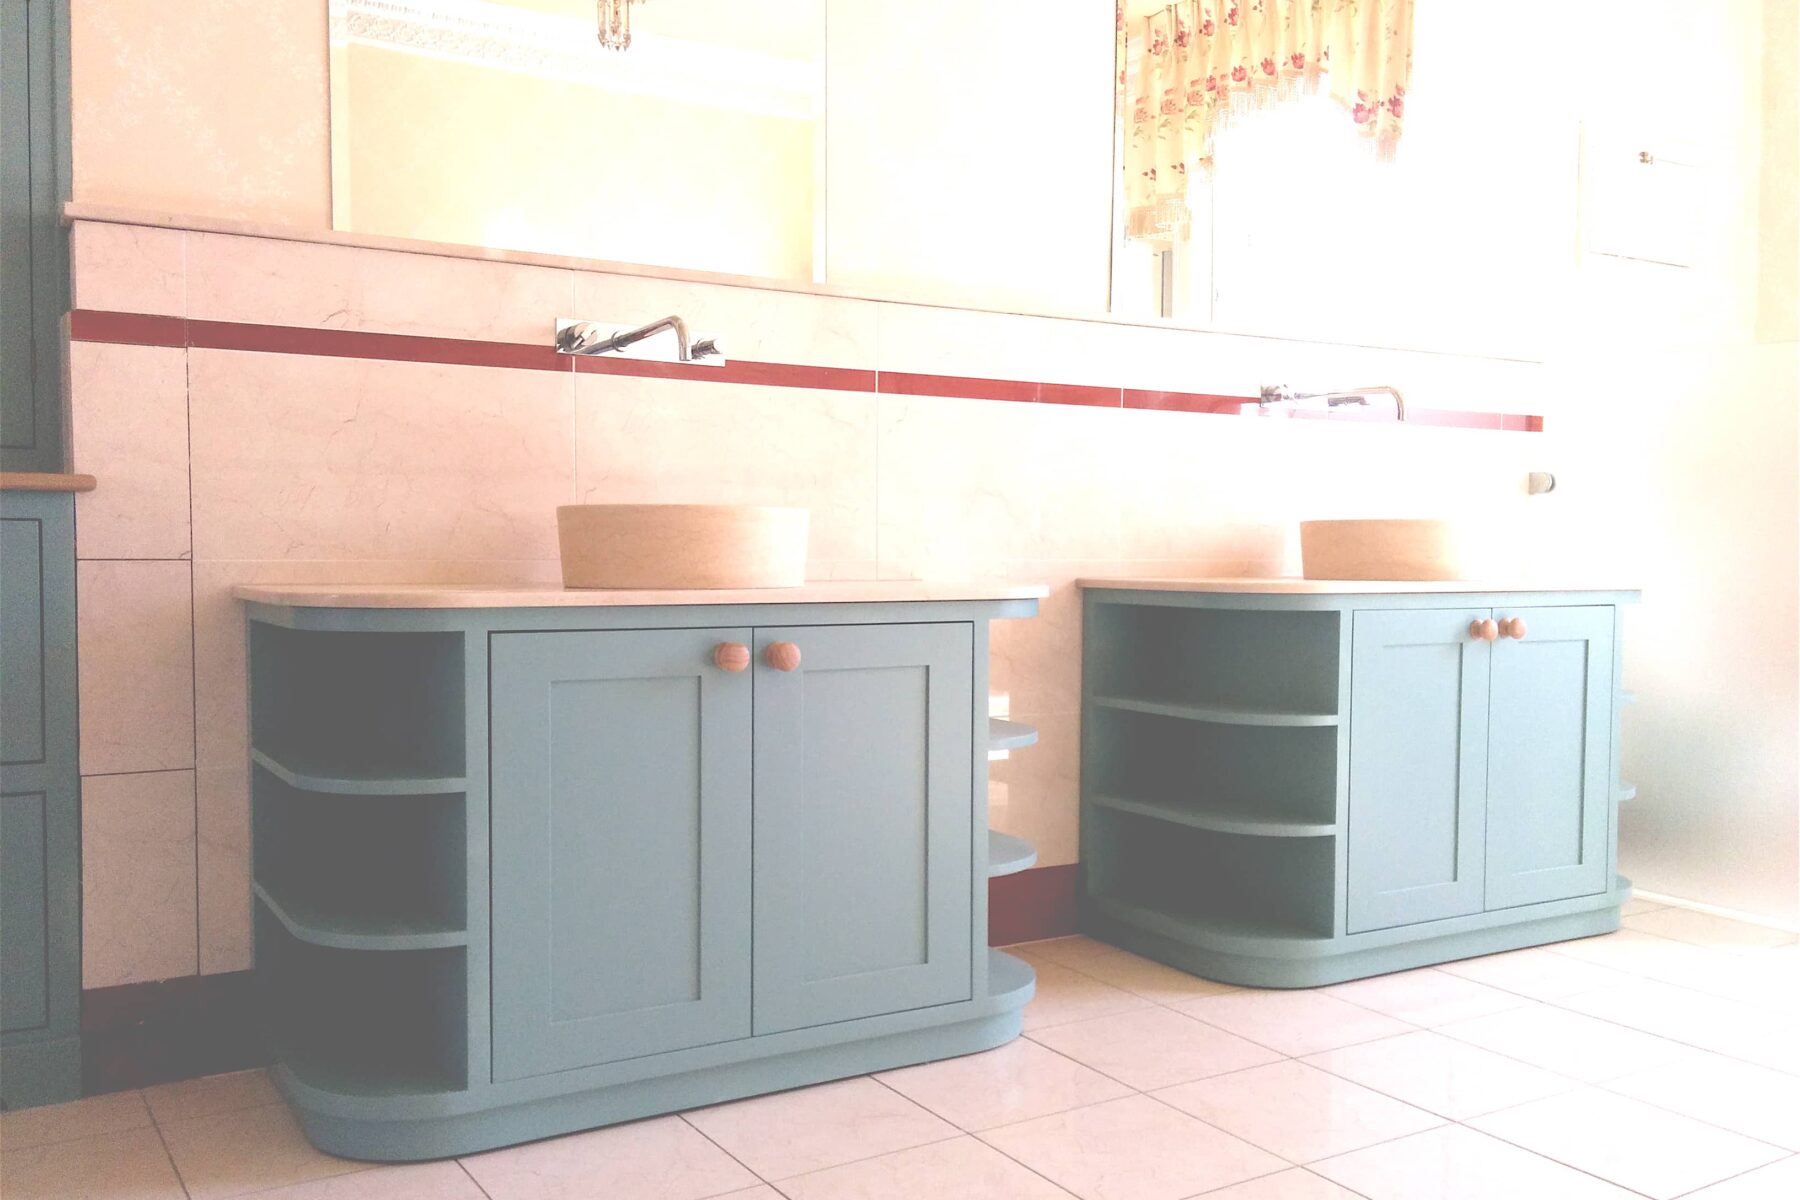 Green curved bathroom cabinets